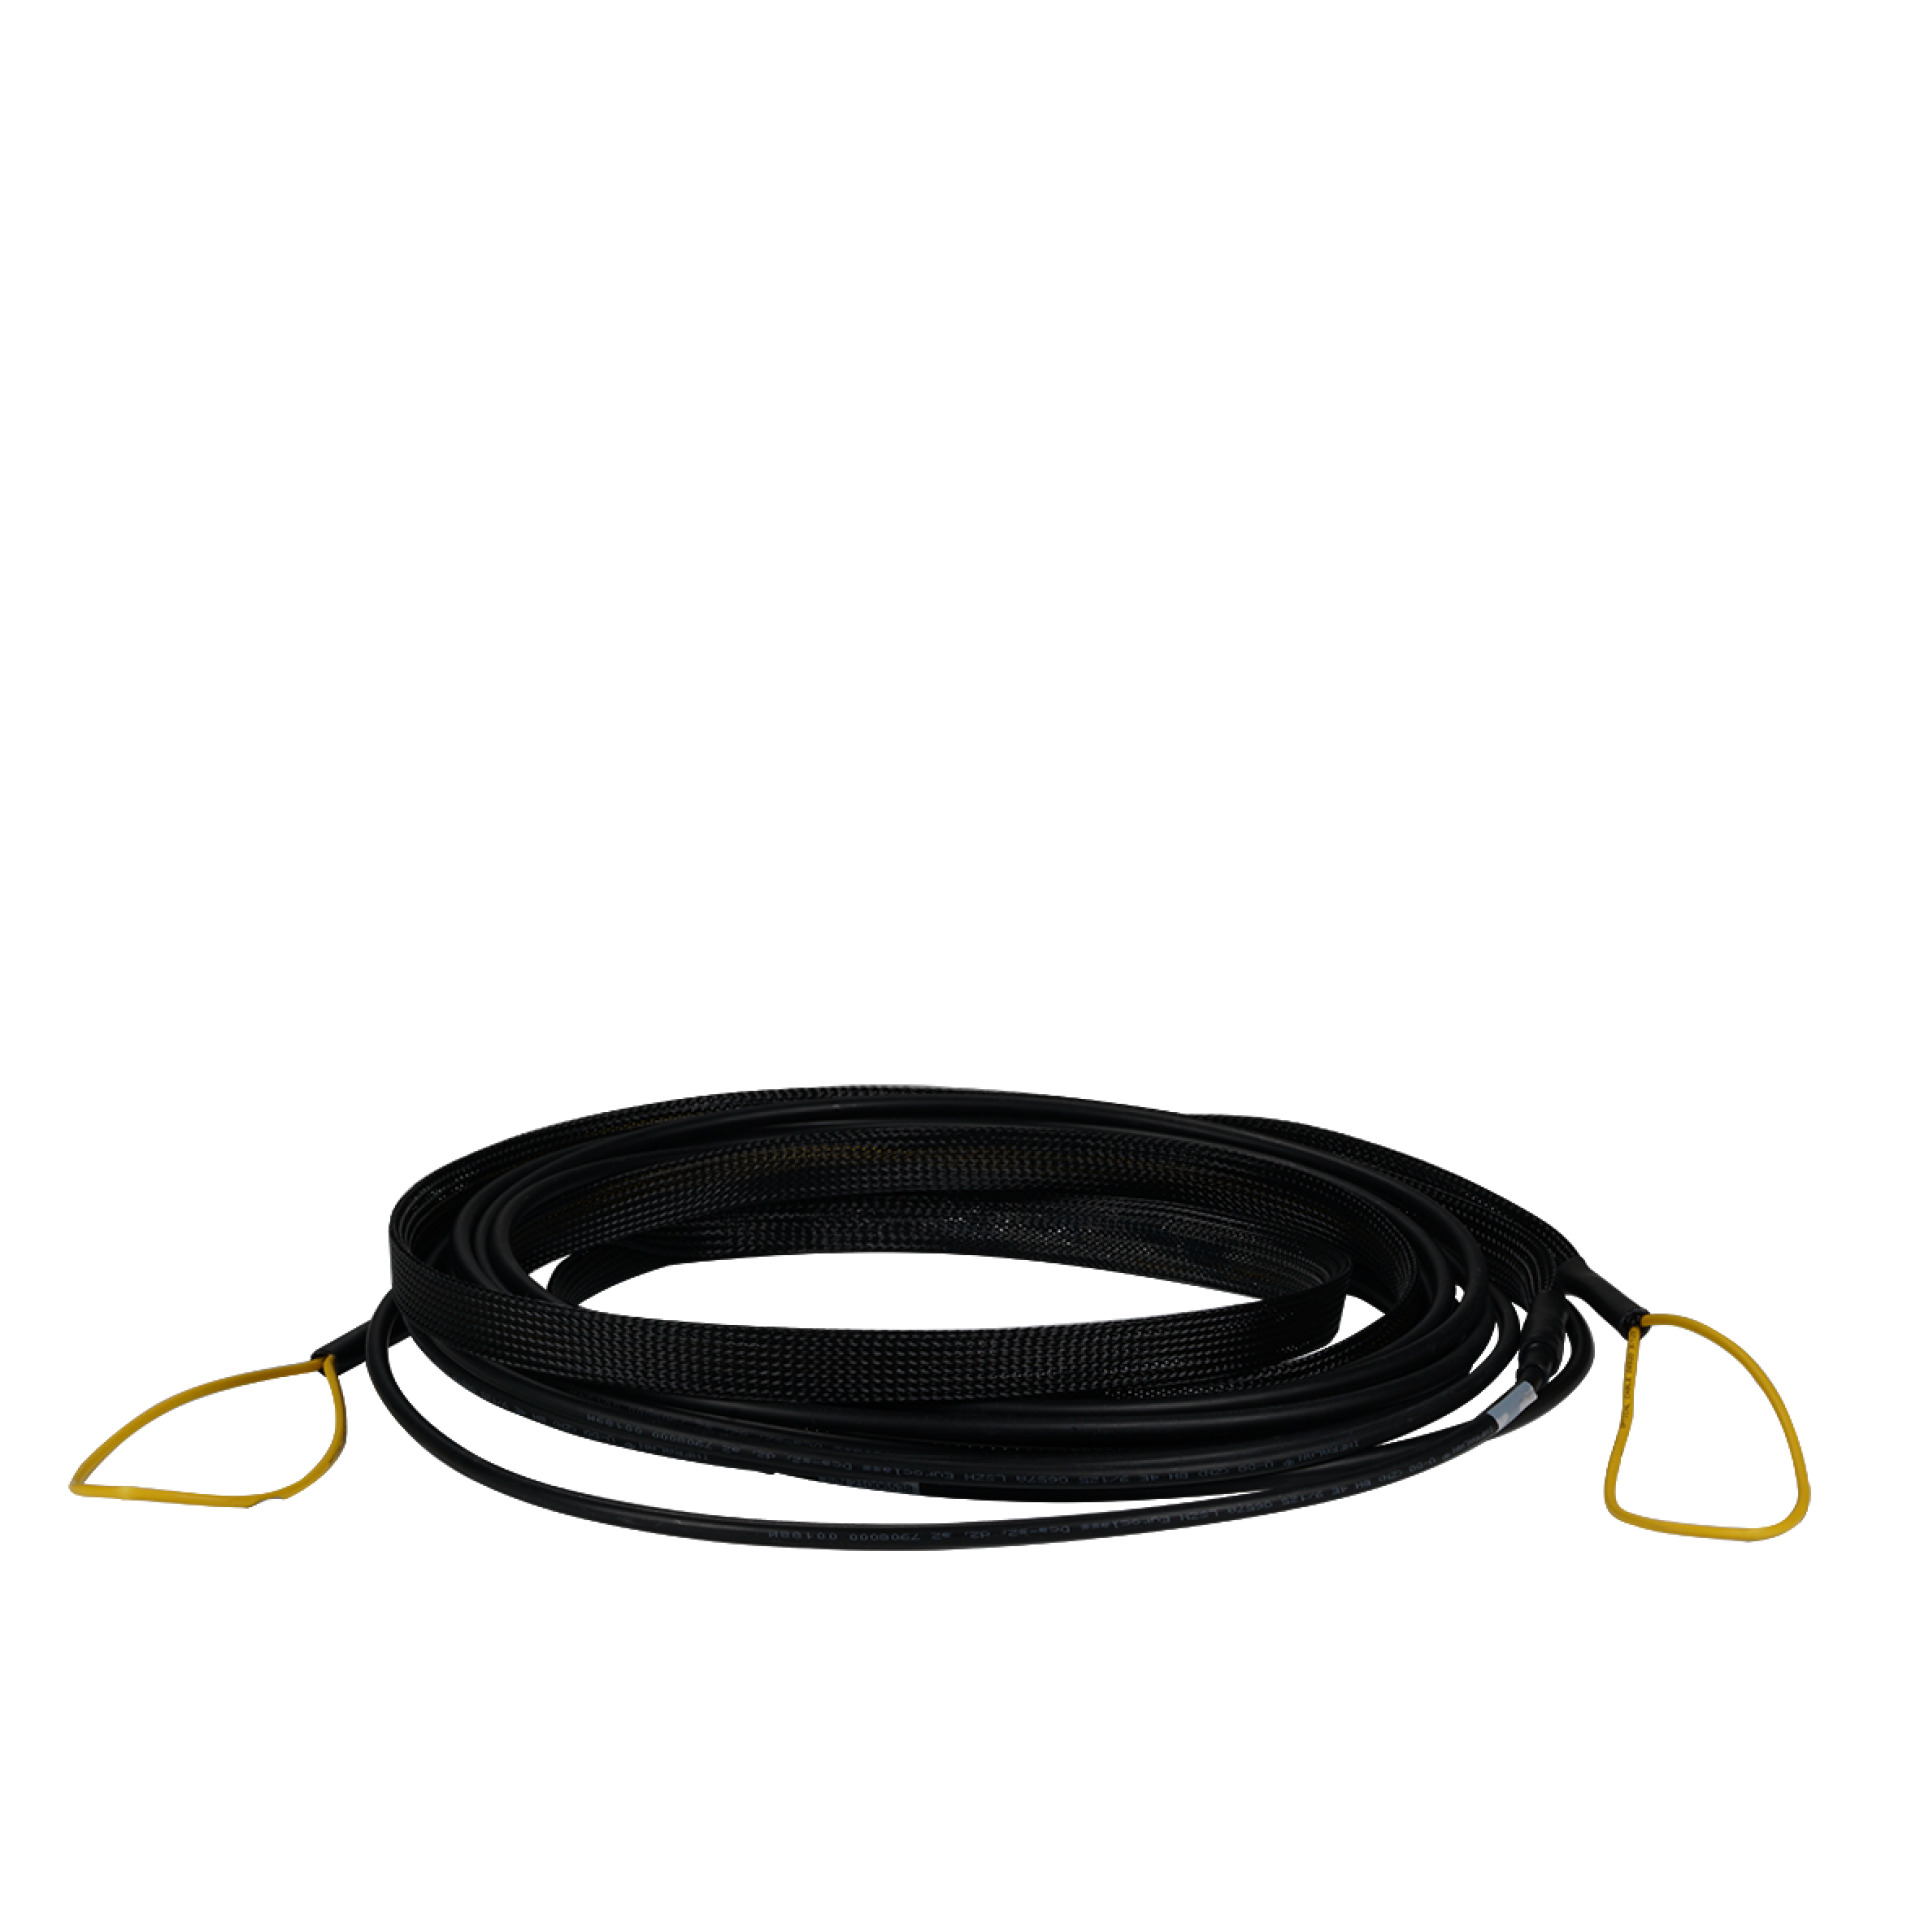 Trunk cable U-DQ(ZN)BH 8E 9/125, LC/LC OS2 200m